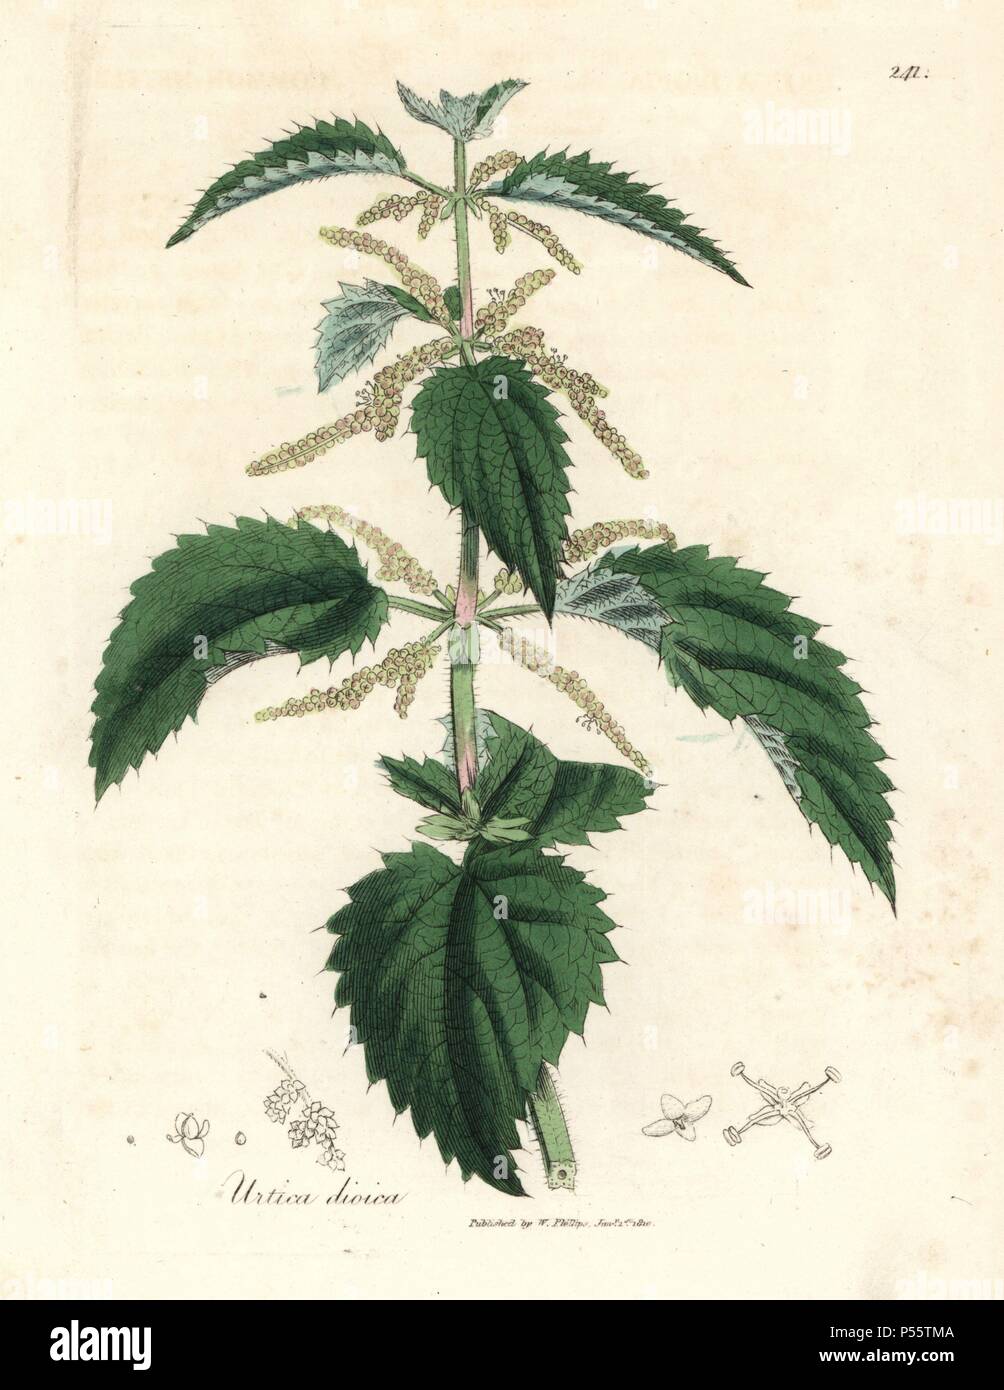 Stinging nettle, Urtica dioica. Handcolored copperplate engraving from a botanical illustration by James Sowerby from William Woodville and Sir William Jackson Hooker's 'Medical Botany' 1832. The tireless Sowerby (1757-1822) drew over 2,500 plants for Smith's mammoth 'English Botany' (1790-1814) and 440 mushrooms for 'Coloured Figures of English Fungi ' (1797) among many other works. Stock Photo